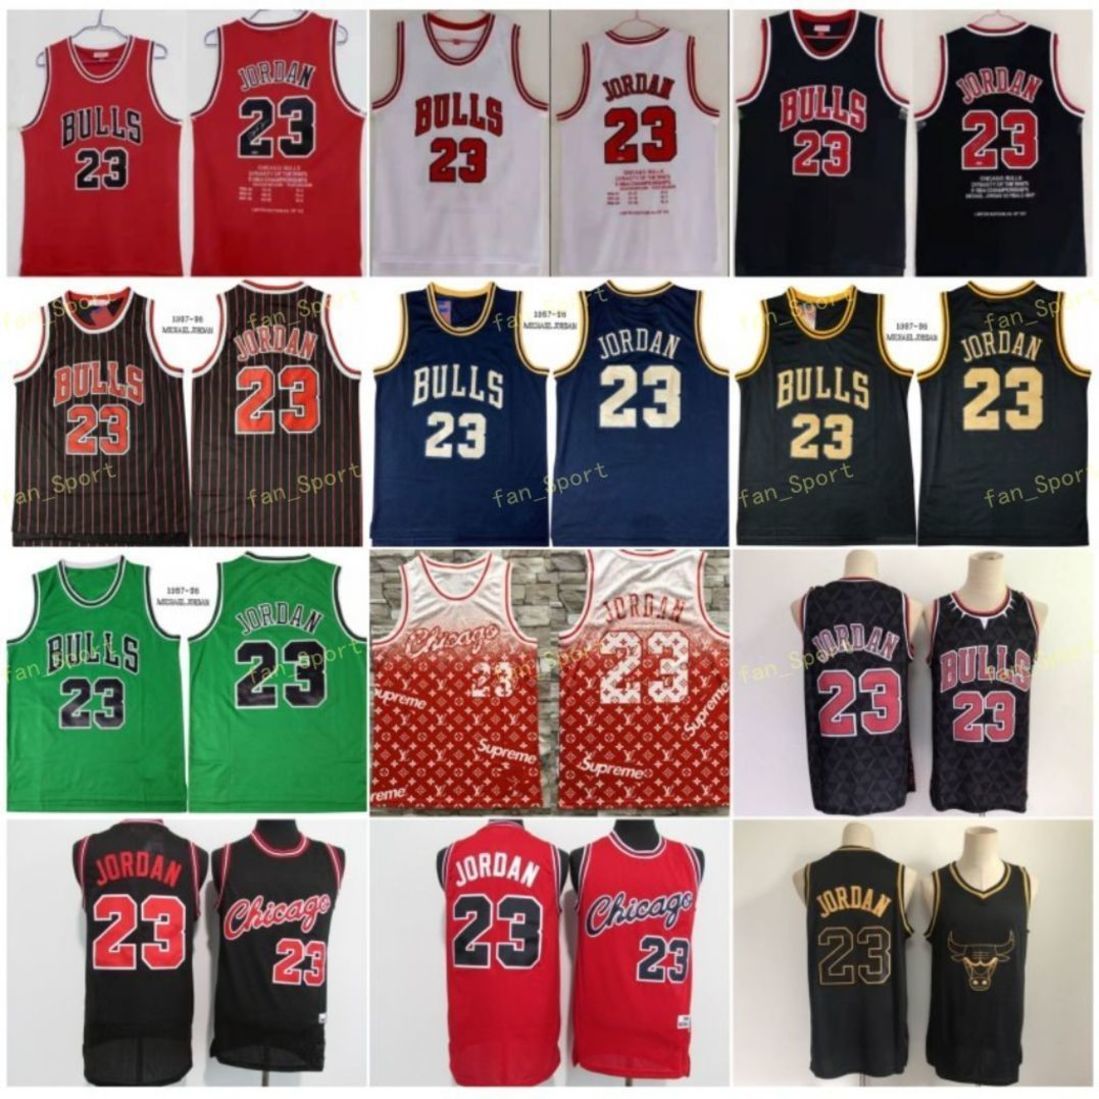 

Vintage Stitched Jersey Mens 23 Michael 91-93 95-98 Stitched Retired Retro Mesh Basketball Jerseys Red White Black Green 84-85 97-98, As